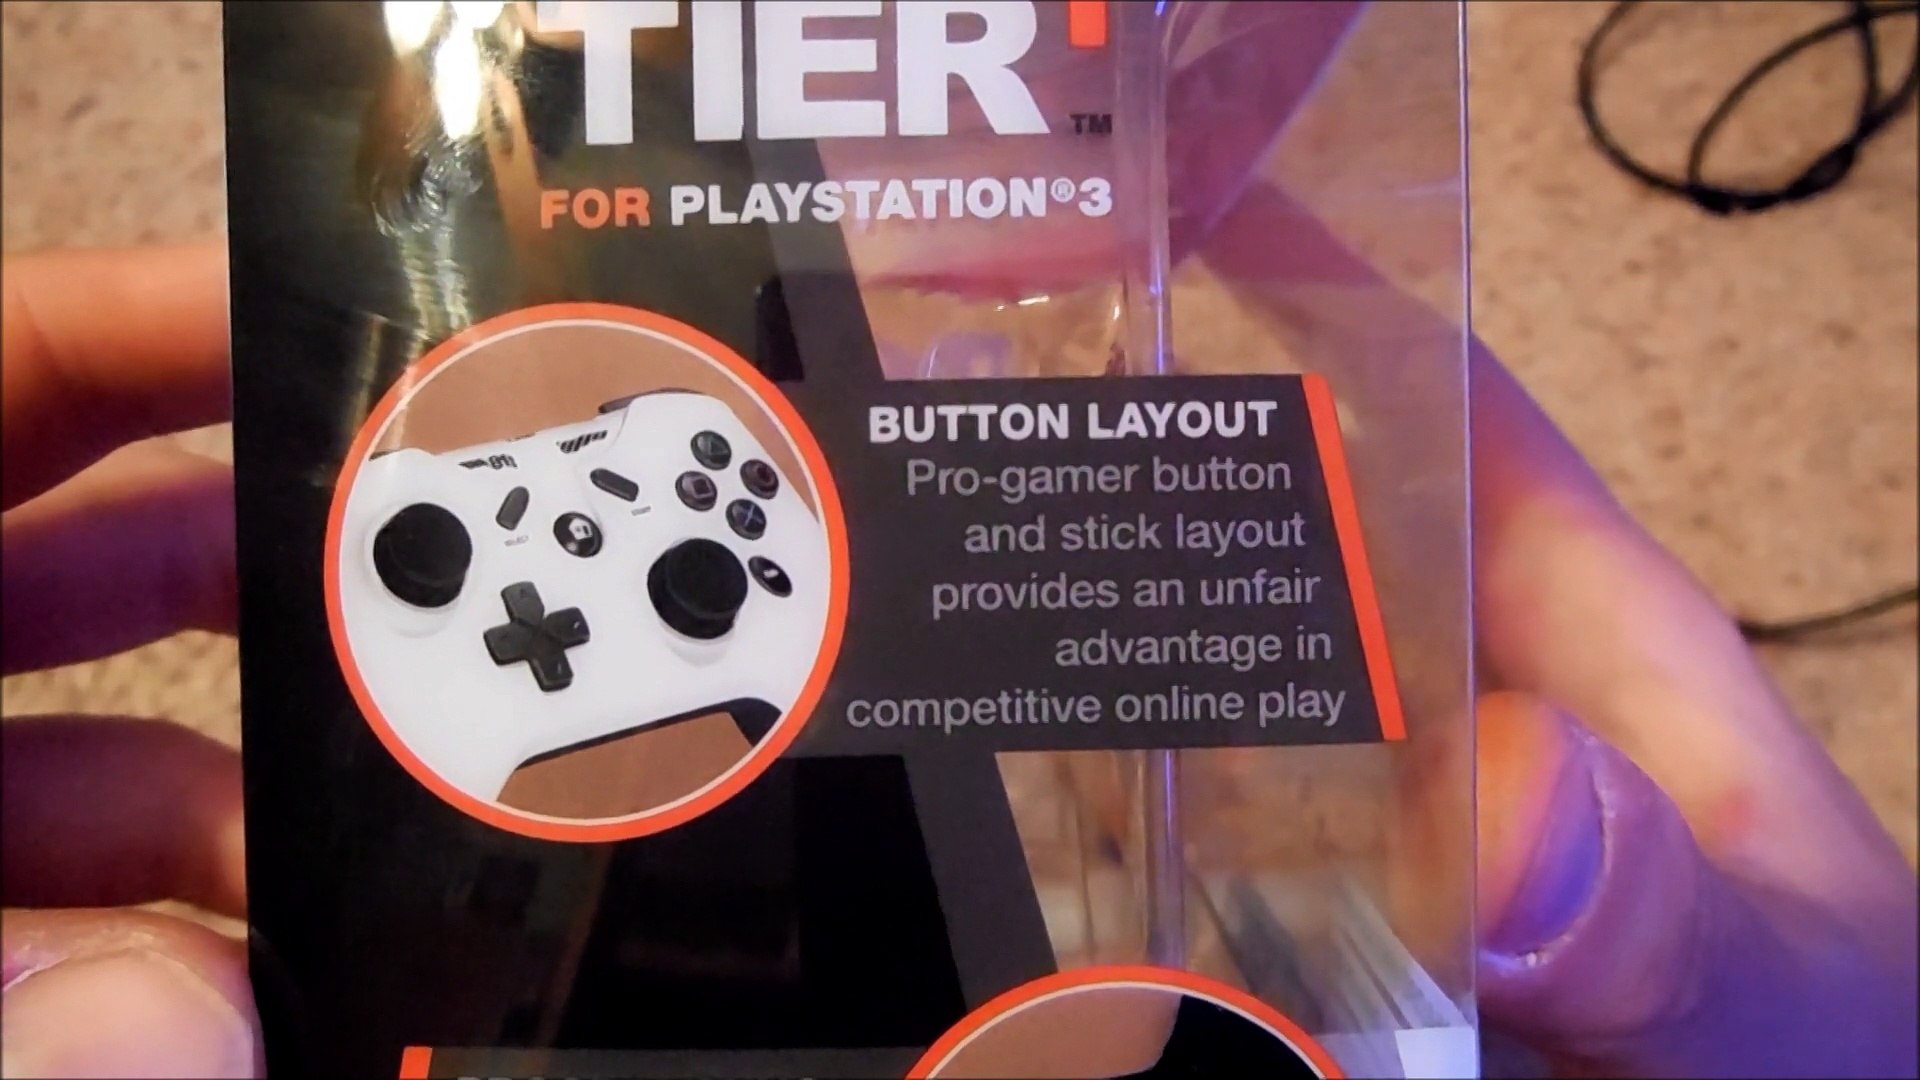 Foxxy Reviews: The Tier 1 FPS Controller (PS3) - video Dailymotion